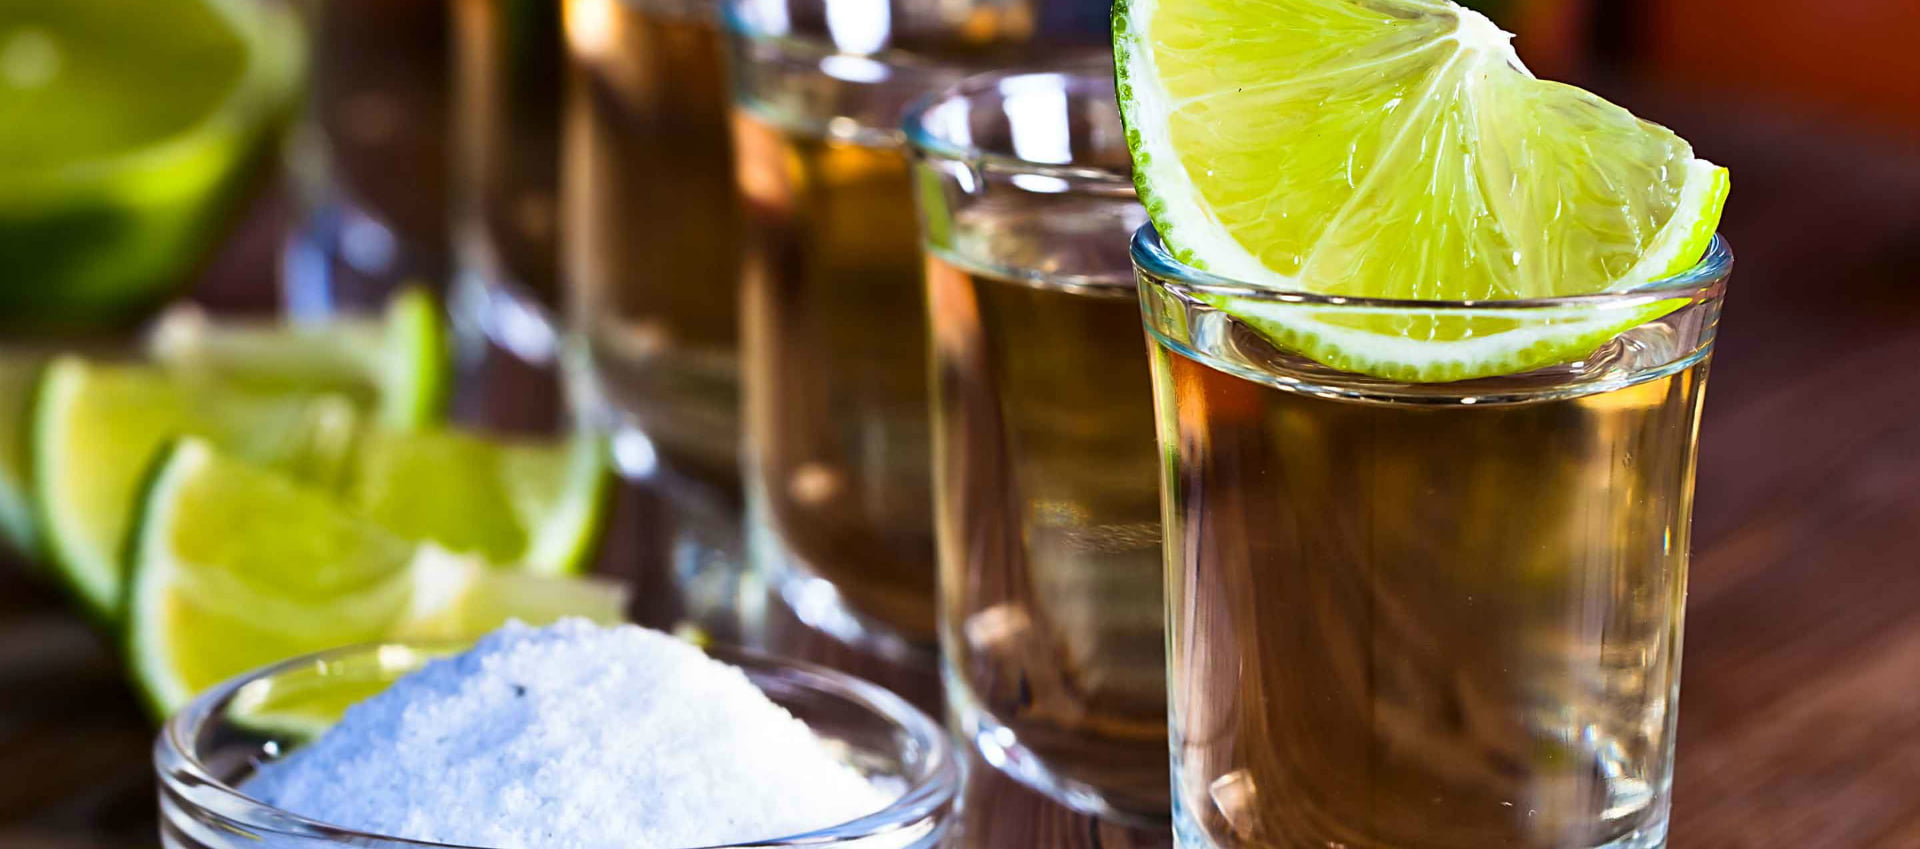 The Best Tequila Bars In London | The Ones Worth The Hangover...